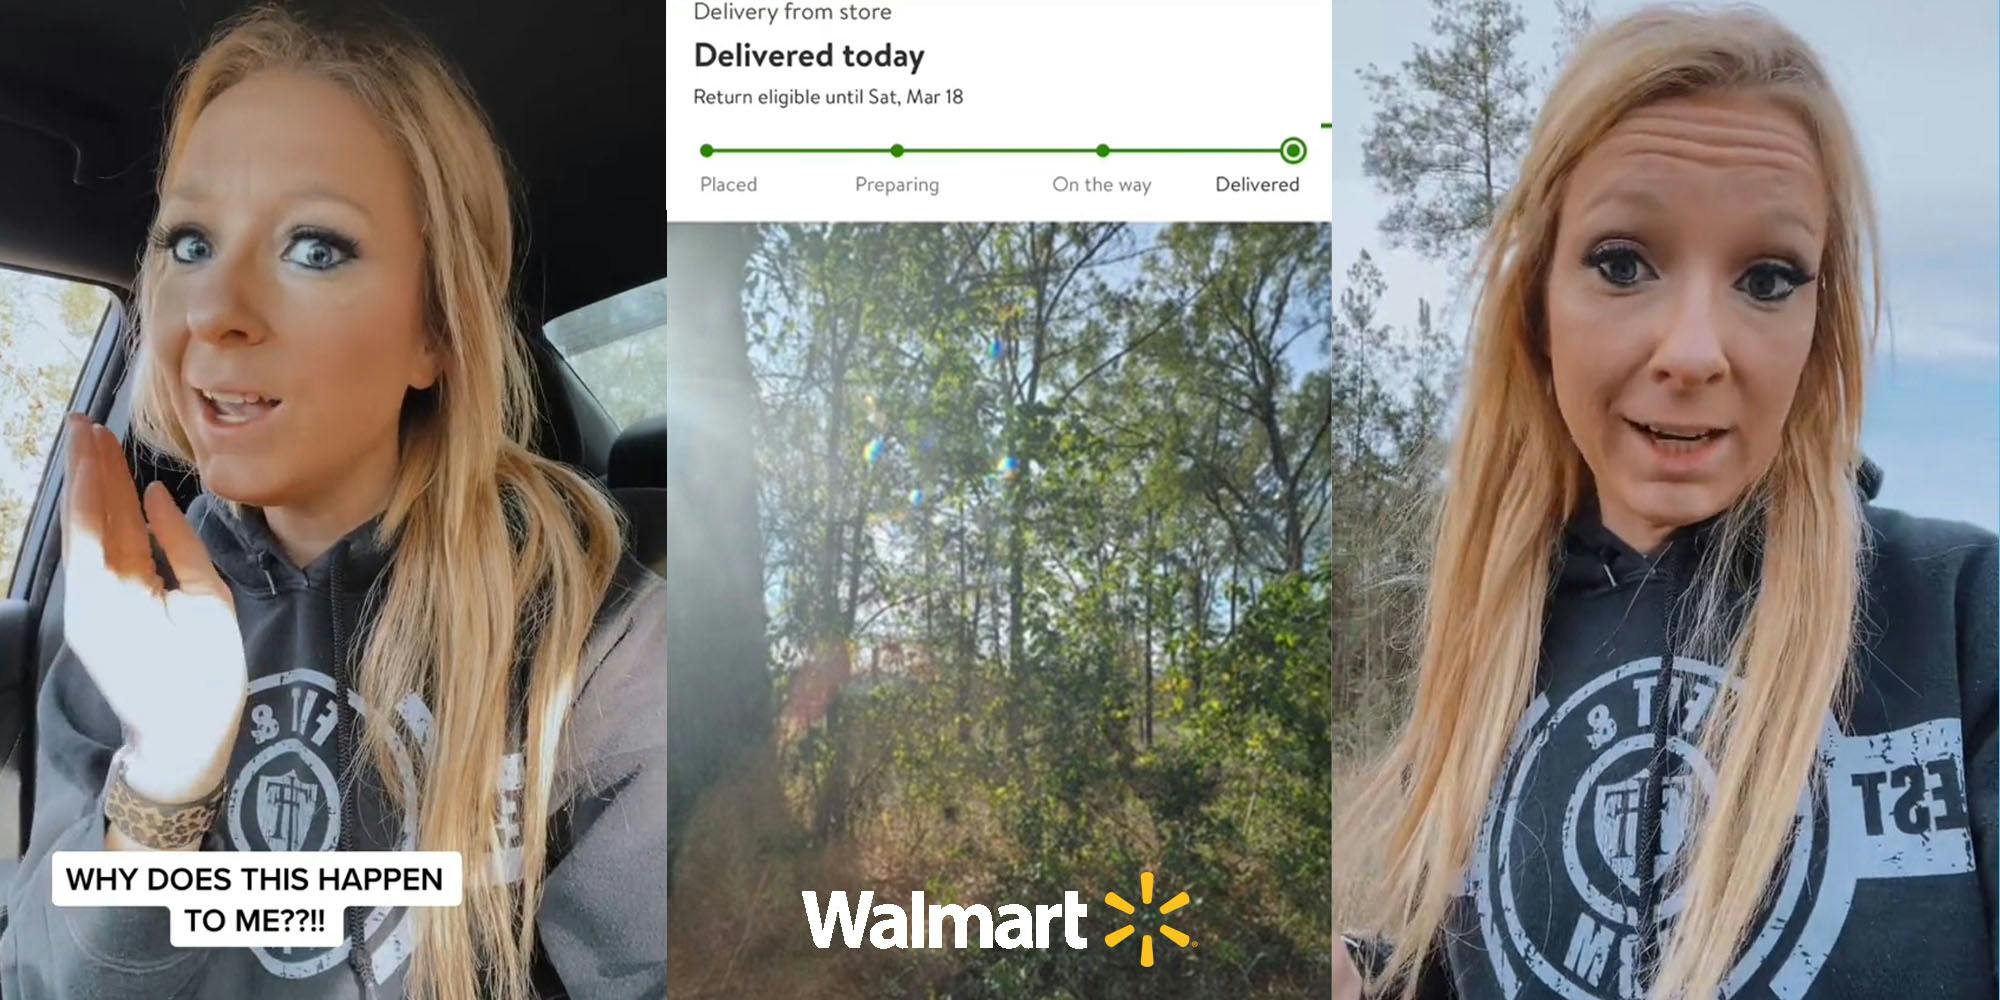 woman speaking in car caption "WHY DOES THIS HAPPEN TO ME?!!" (l) Walmart delivery on app with image of woods and Walmart logo centered at bottom (c) Woman speaking outside (r)